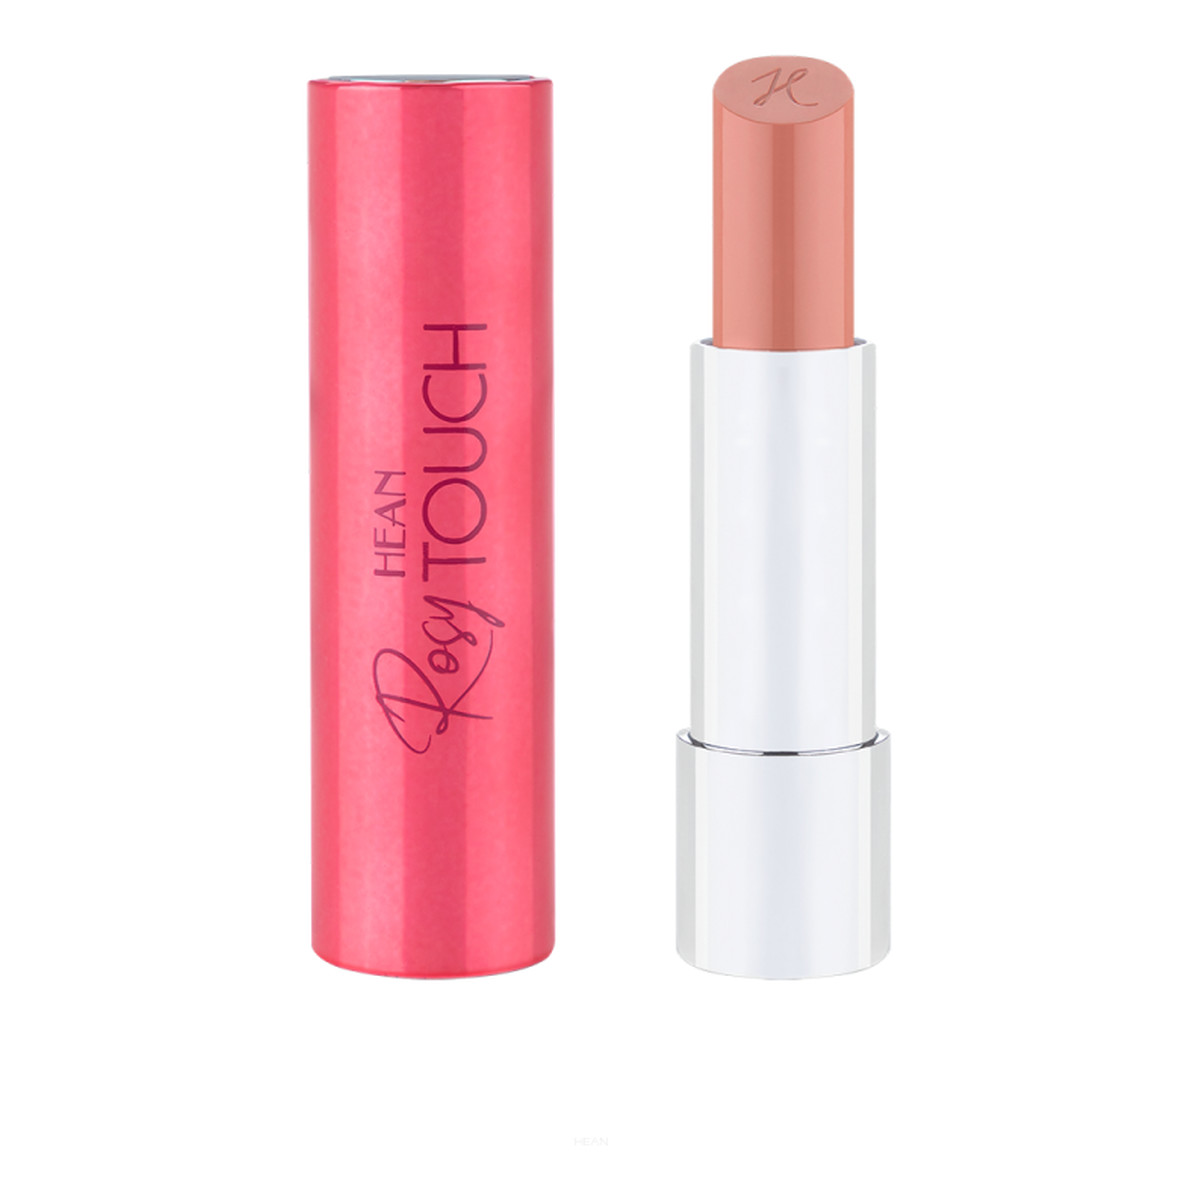 Hean Rosy Touch Tinted Lip Balm Pomadka - balsam do ust 4g